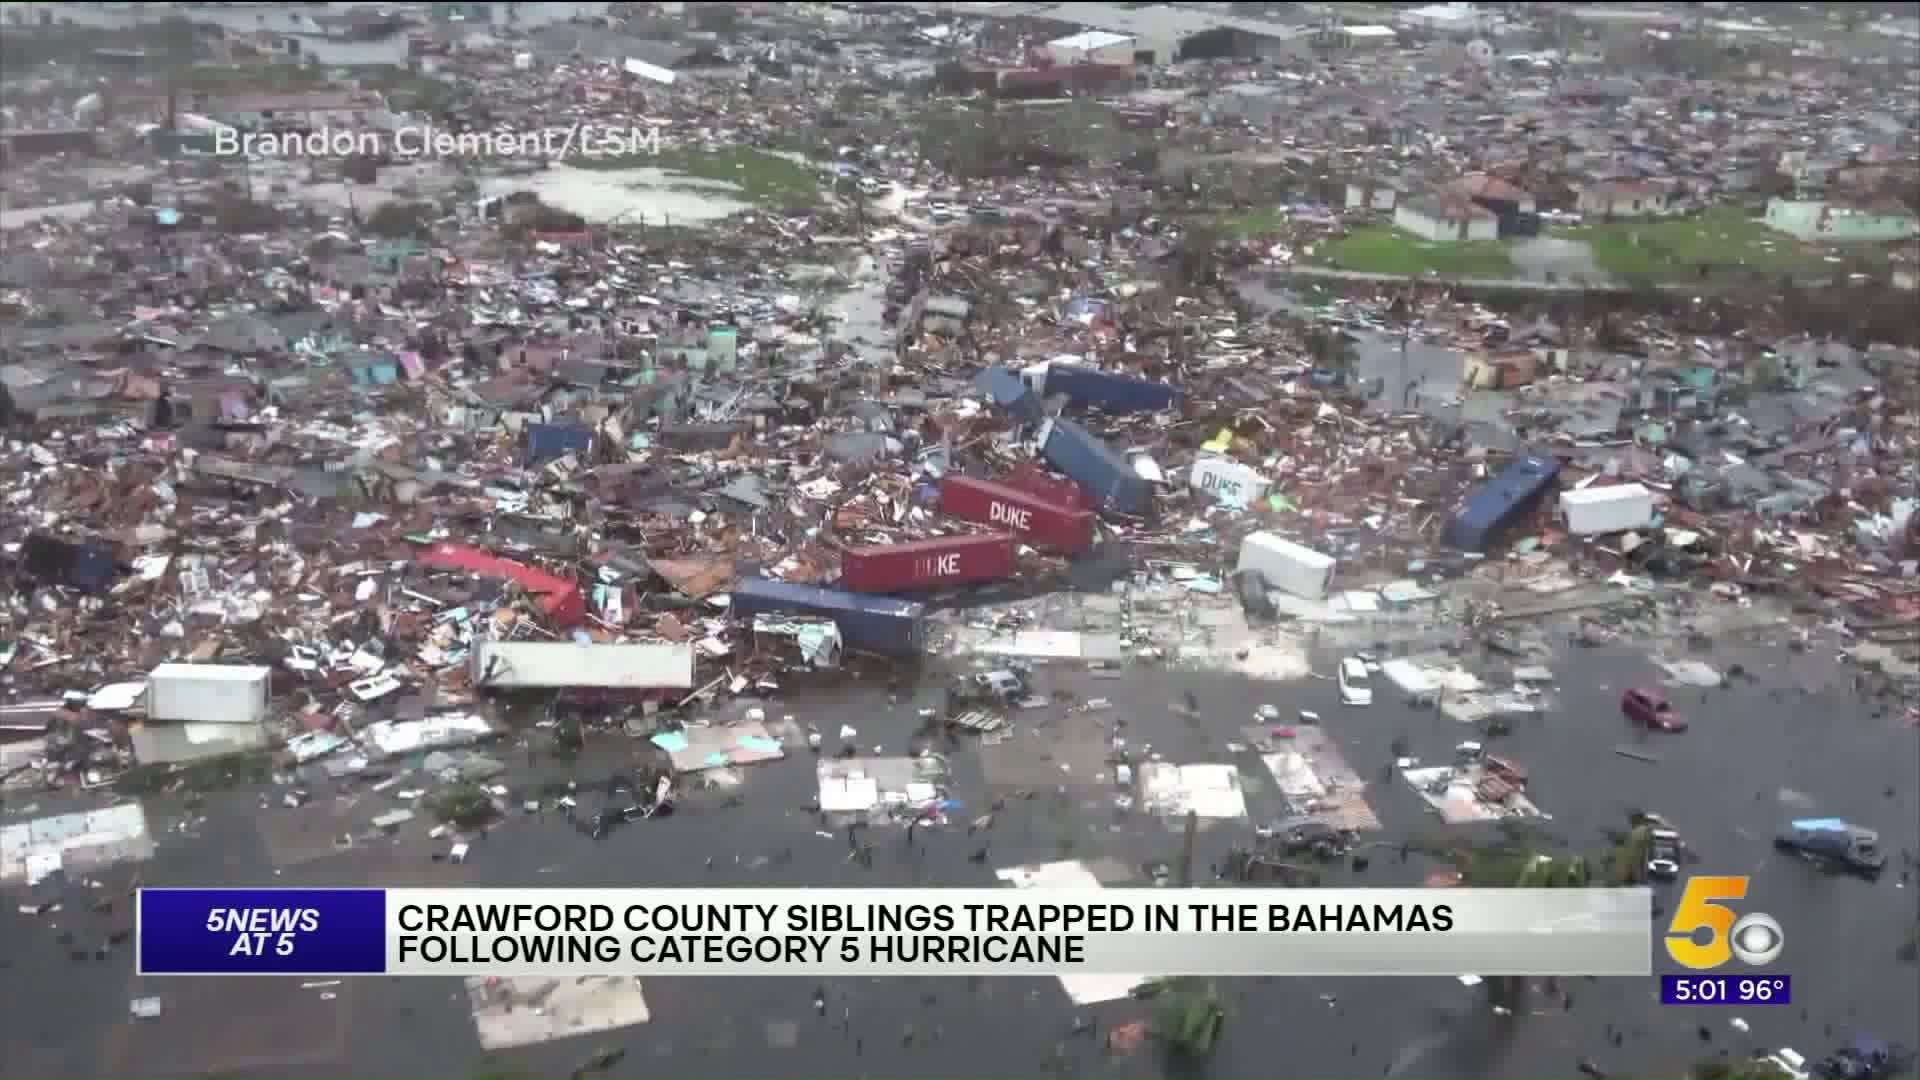 Crawford County Sibilings Trapped in Bahamas After Hurricane Dorian